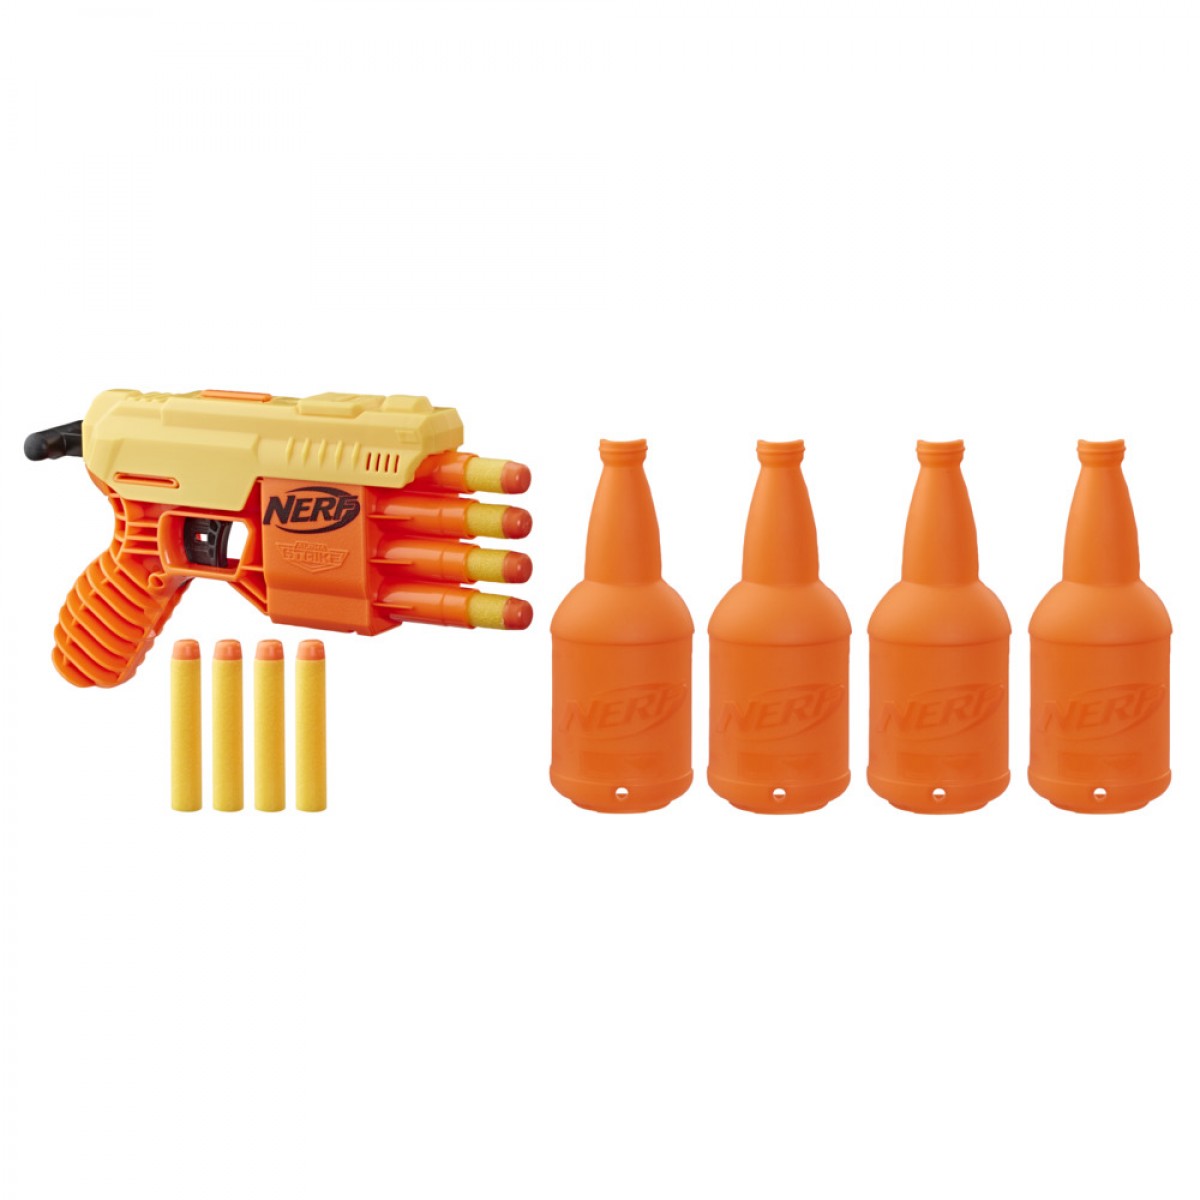 Fang Qs-4 Targeting Set -- 13-Piece Nerf Alpha Strike Set Includes Toy Blaster, 4 Half-Targets, And 8 Official Nerf Elite Darts For Kids, Teens, Adults